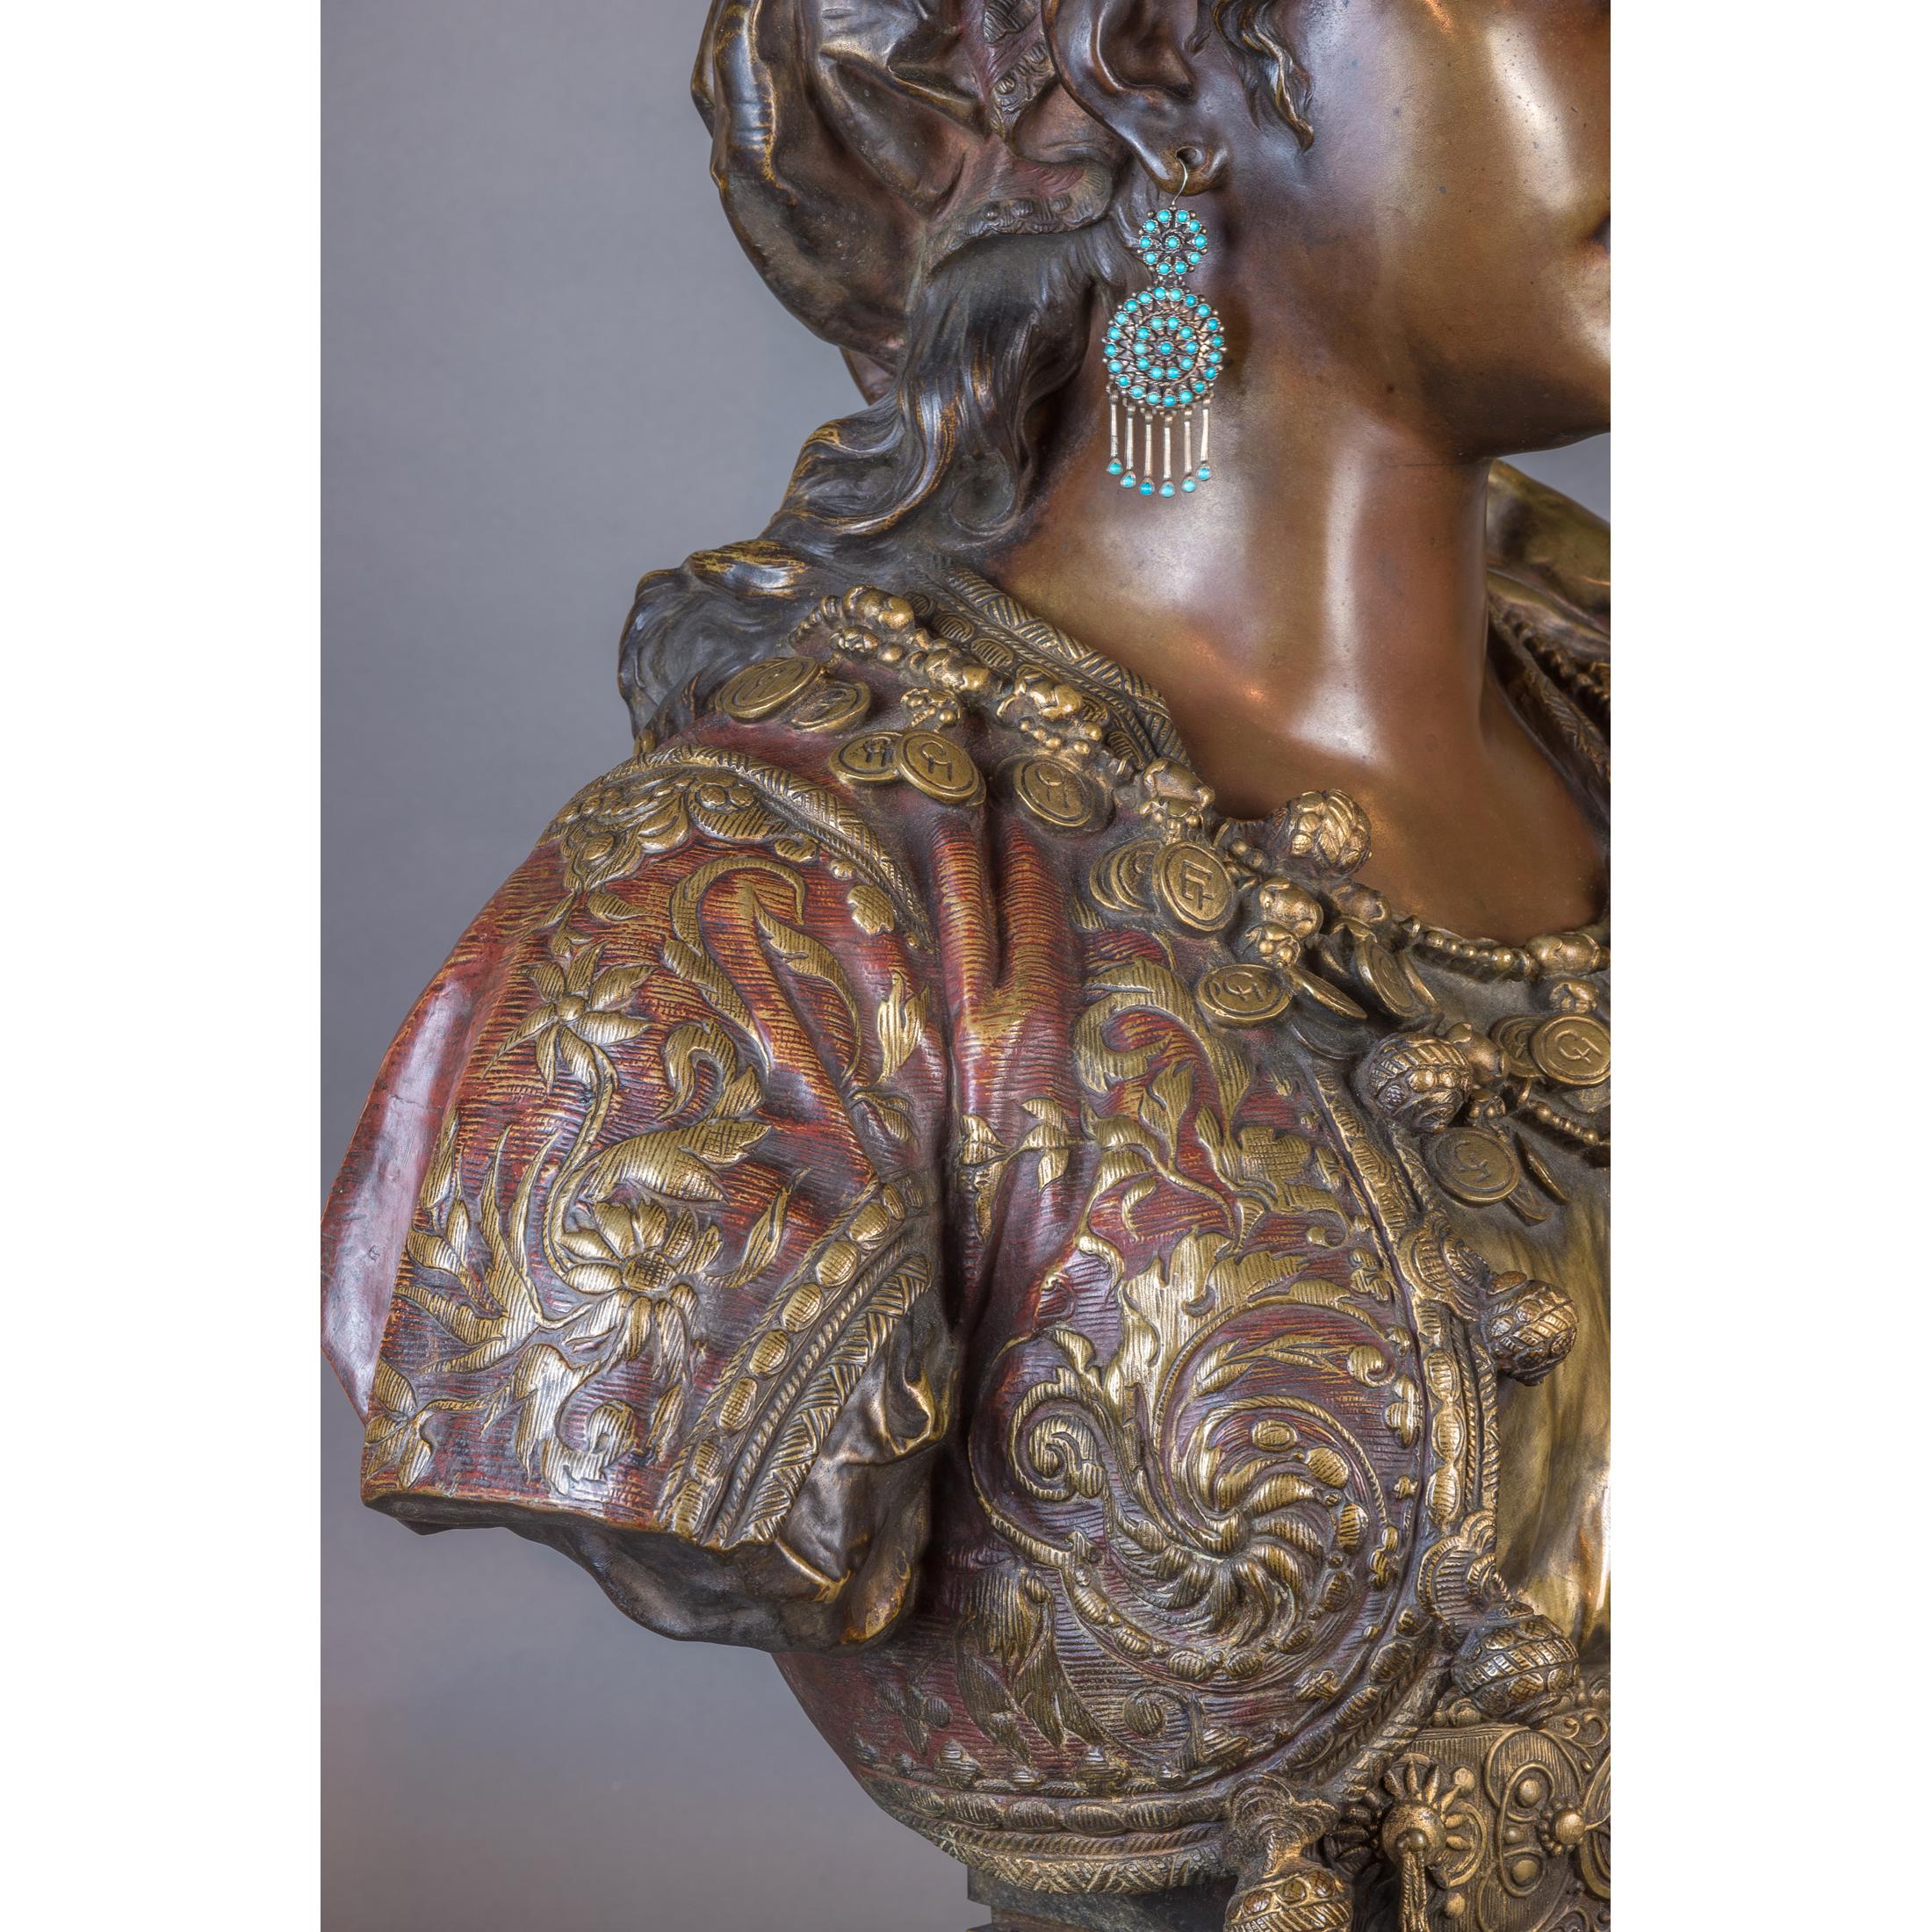 A Fine Quality Polychrome-Patinated Bronze Bust of an Orientalist Princess. 
The Princess wears a luxurious gold and silver brocade vest, with patinas that skillfully imitate gold and silver threads. Adrien-Etienne Gaudez's mixed media approach